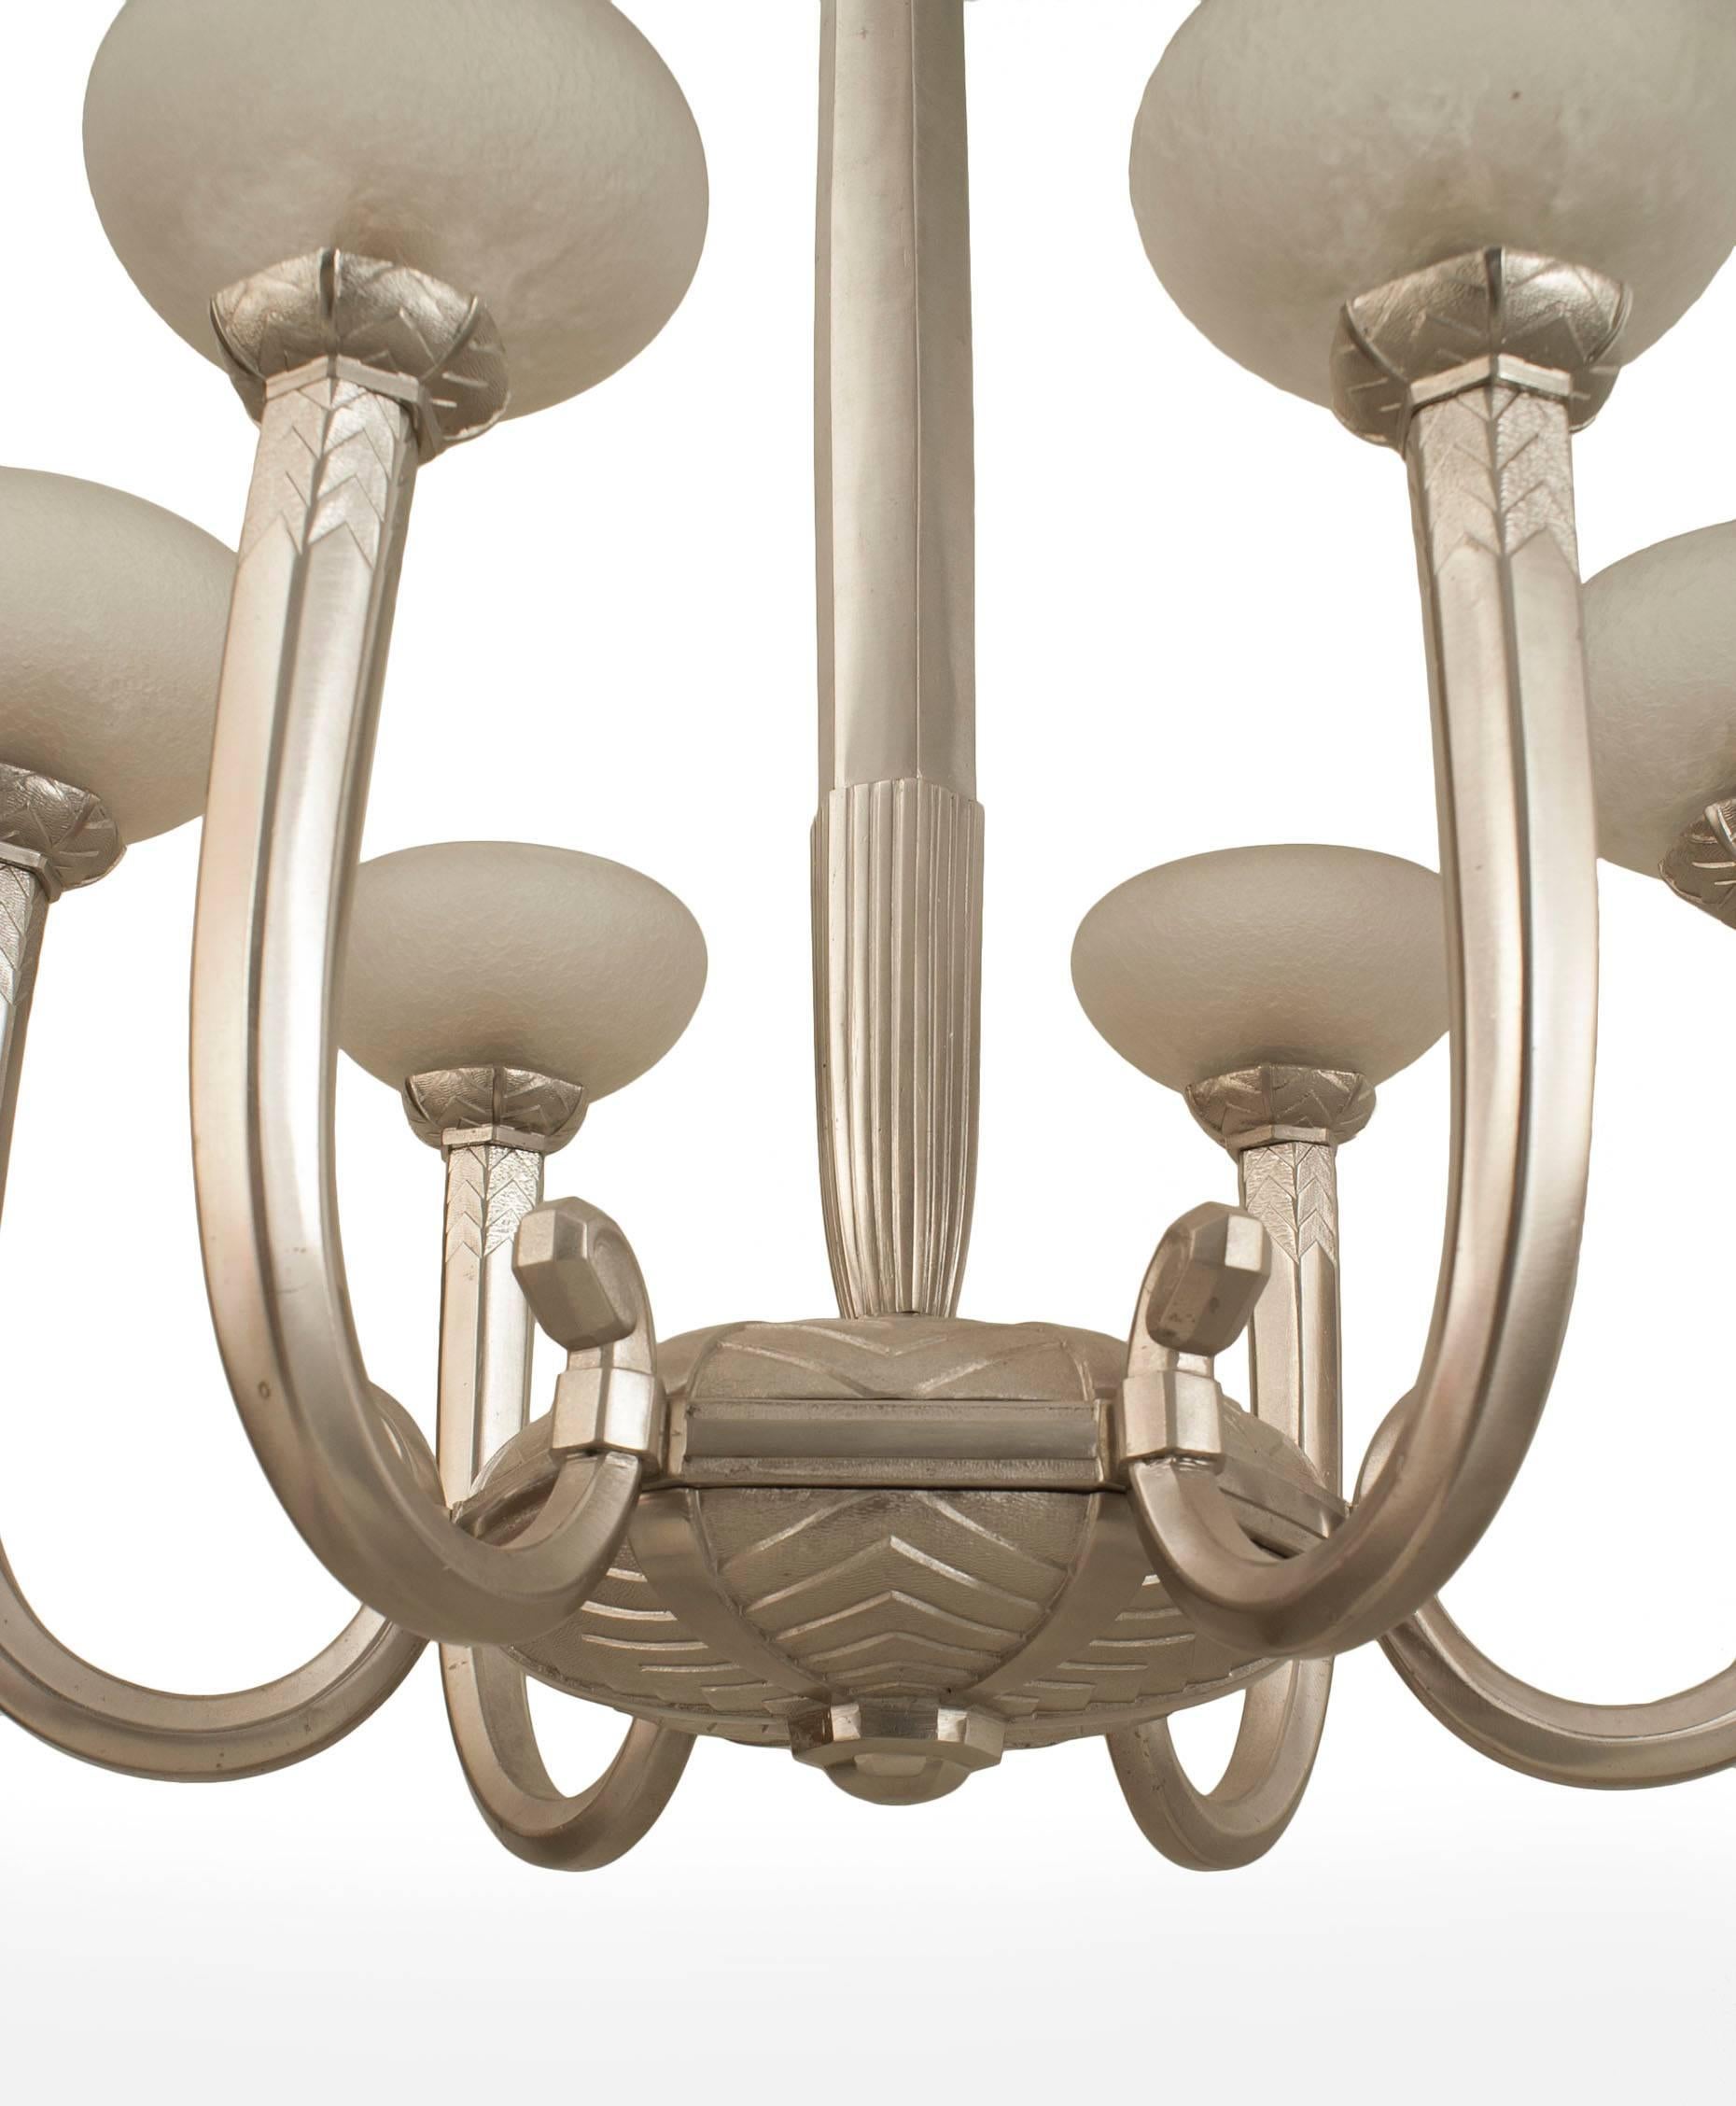 French Art Deco (circa 1930) silvered bronze 6 arm chandelier supporting acid etched glass shades emanating from a geometric design center & center post (Glass attributed to Schneider).
  